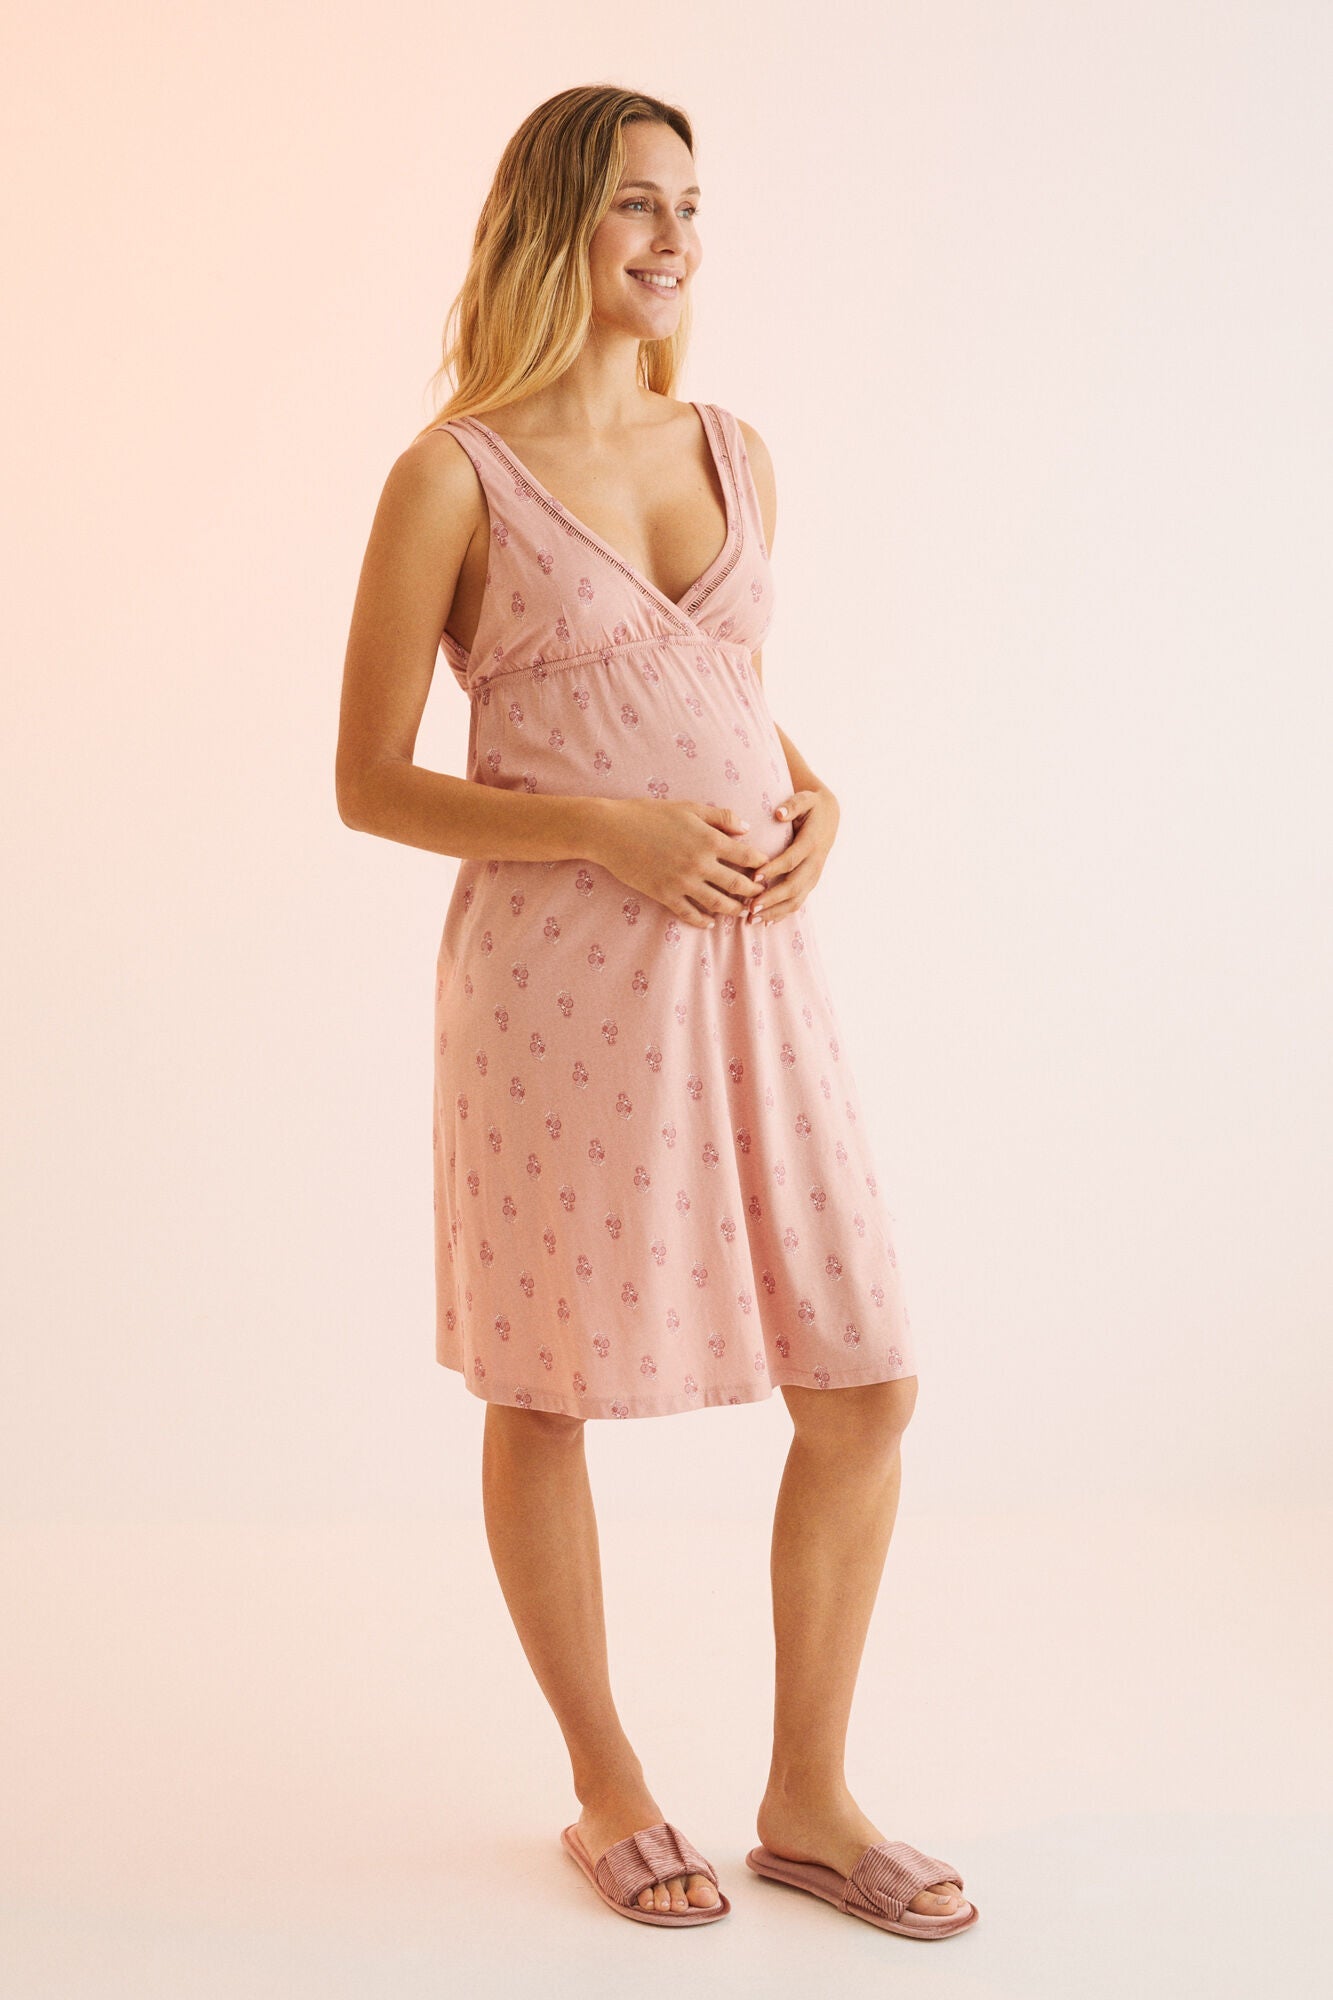 Maternity nightgown